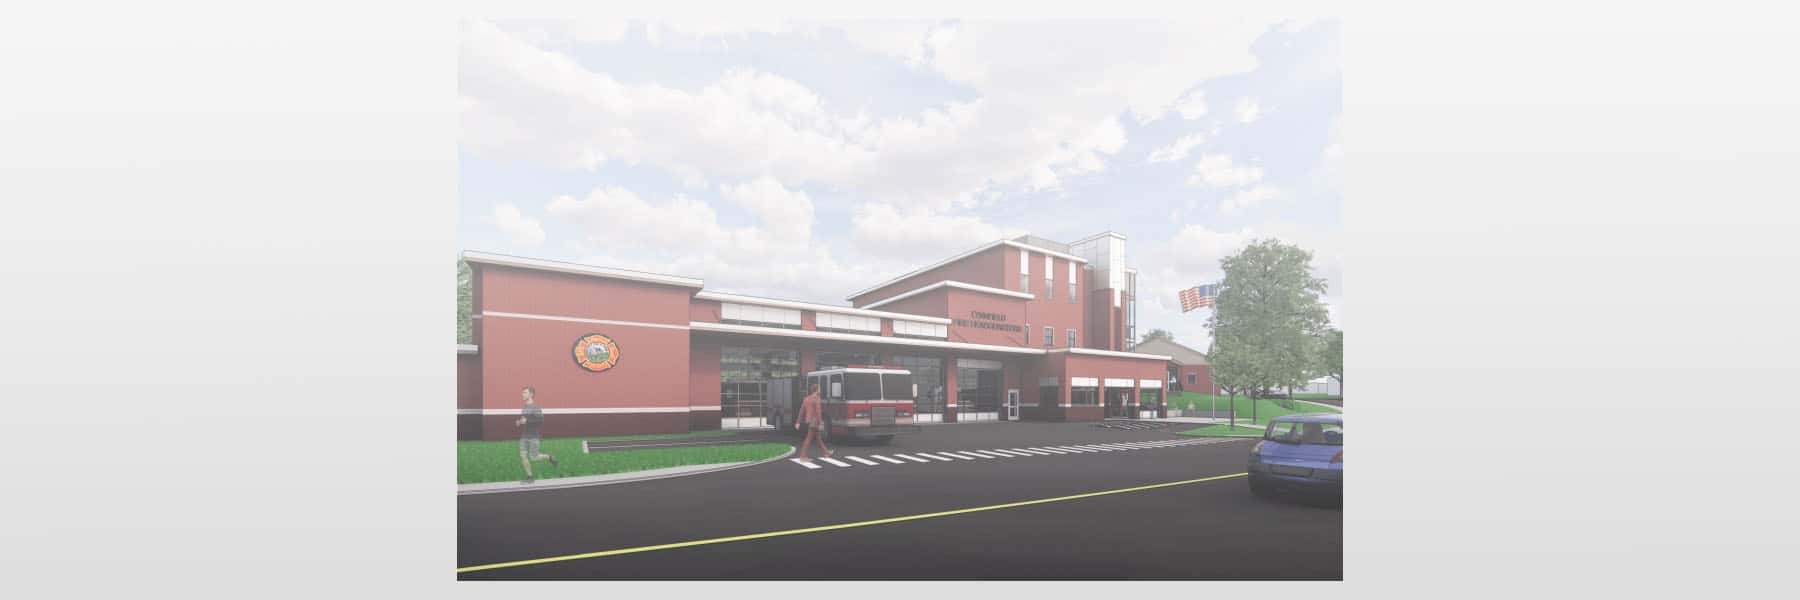 Proposed New Fire Department Headquarters